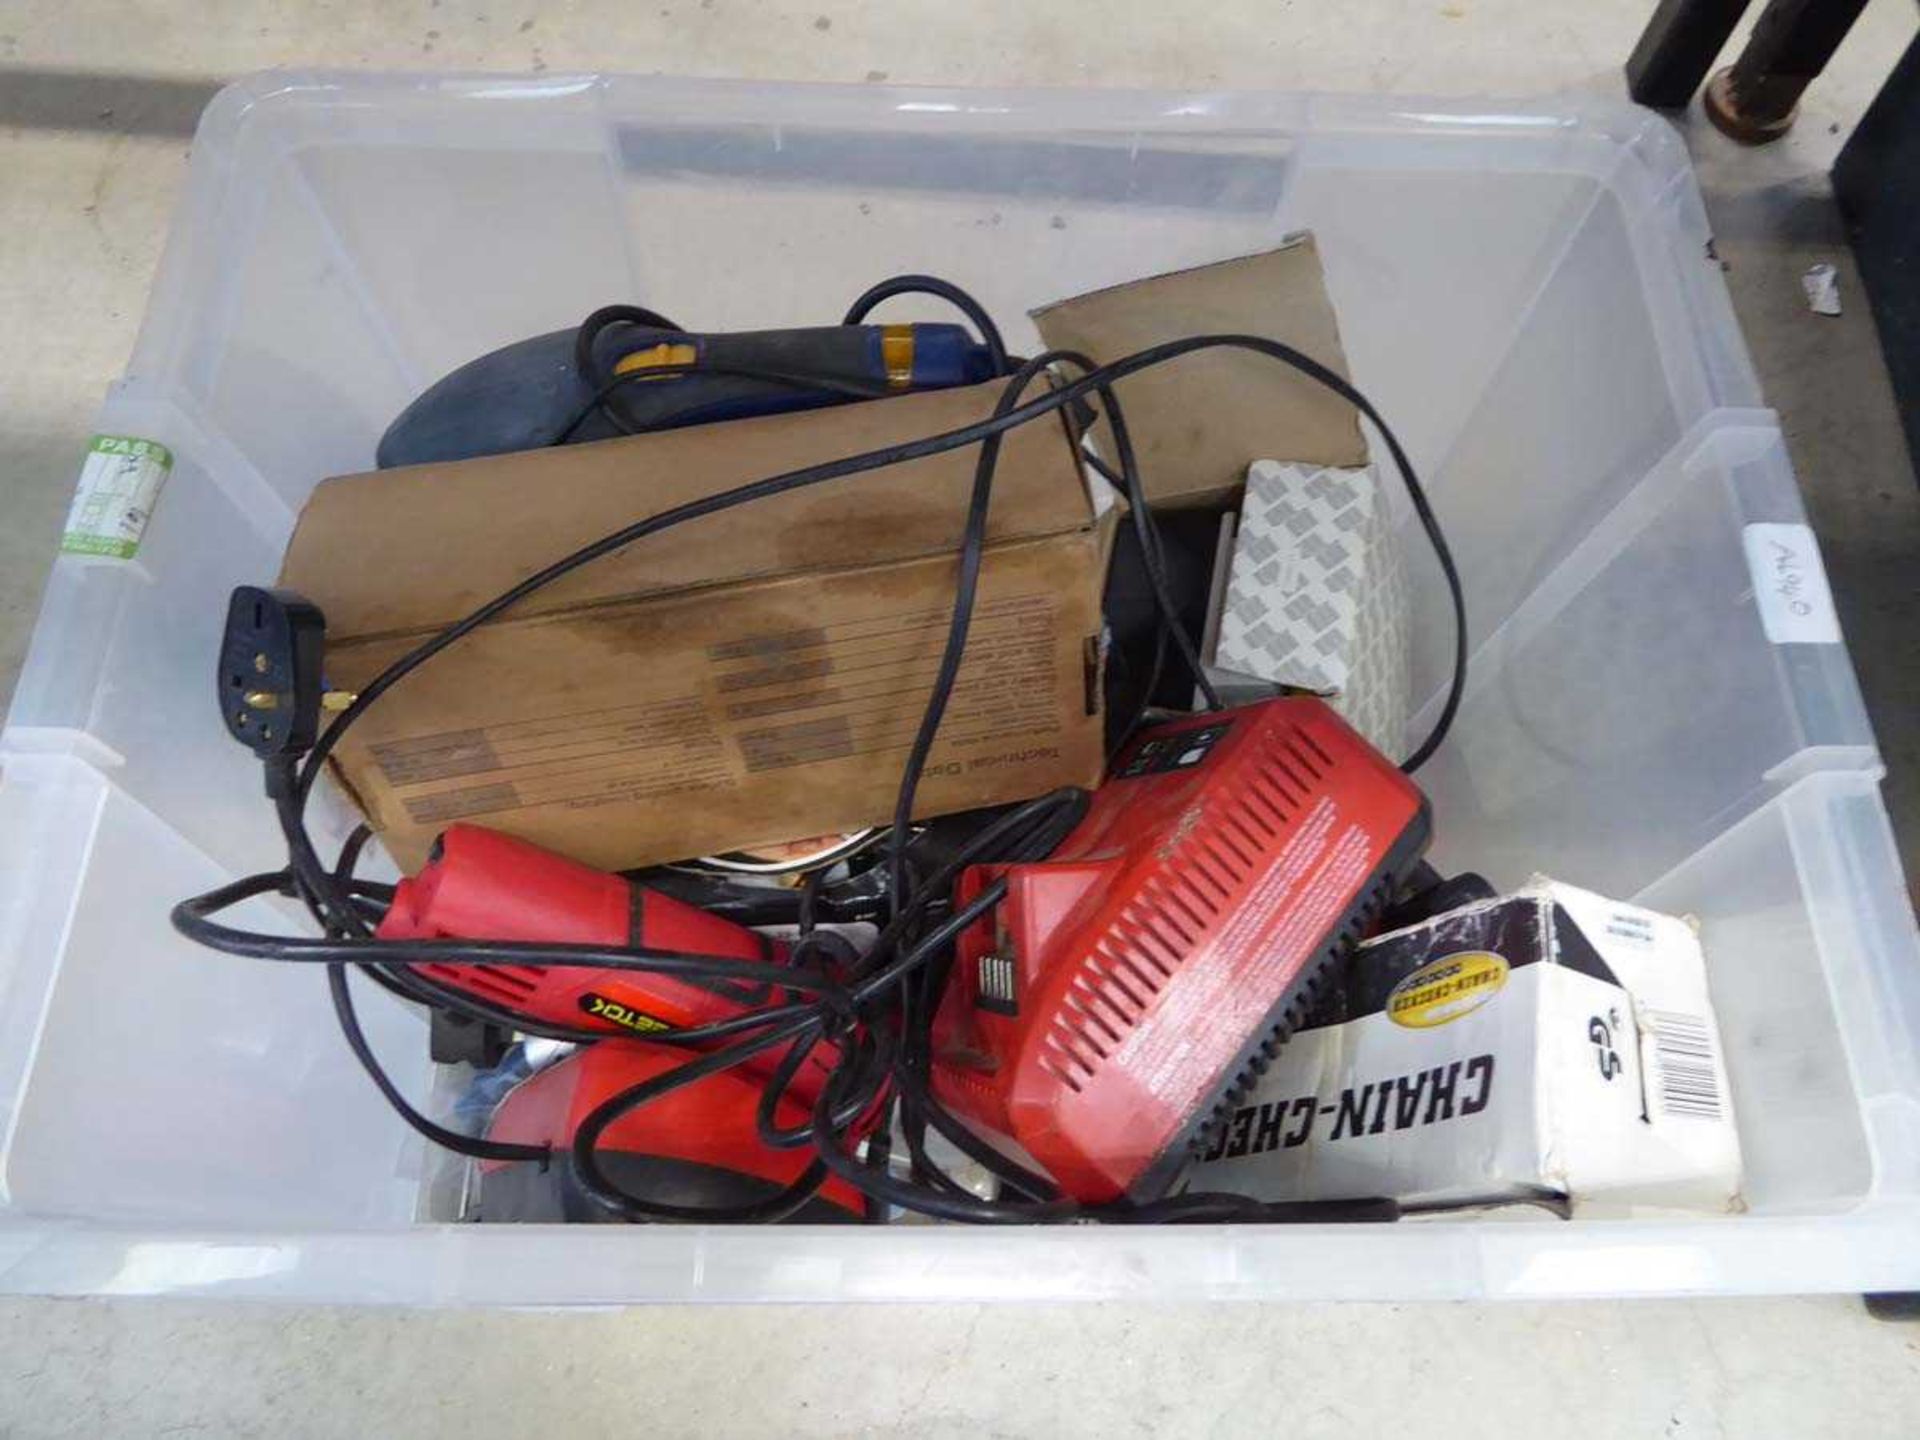 Plastic crate containing Wera screwdrivers, torch, lantern, sanders and various other tools